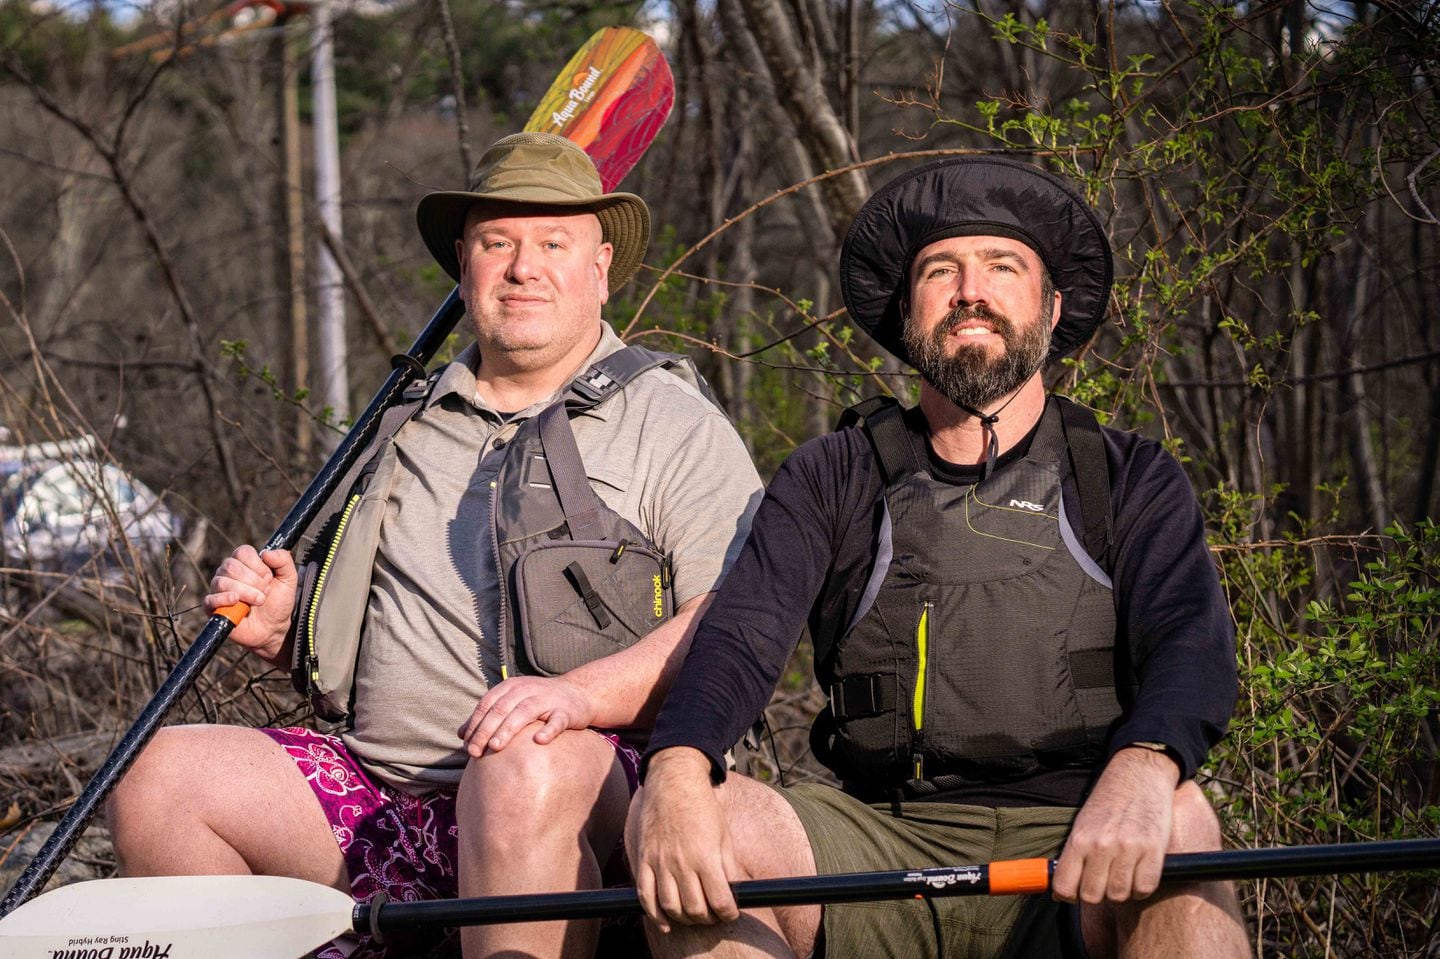 On April Fools' Day 2023, Gerry Brown (right) and Gene Hurley set out from a pond in Bellingham with the goal of kayaking the Charles River by summer's end.